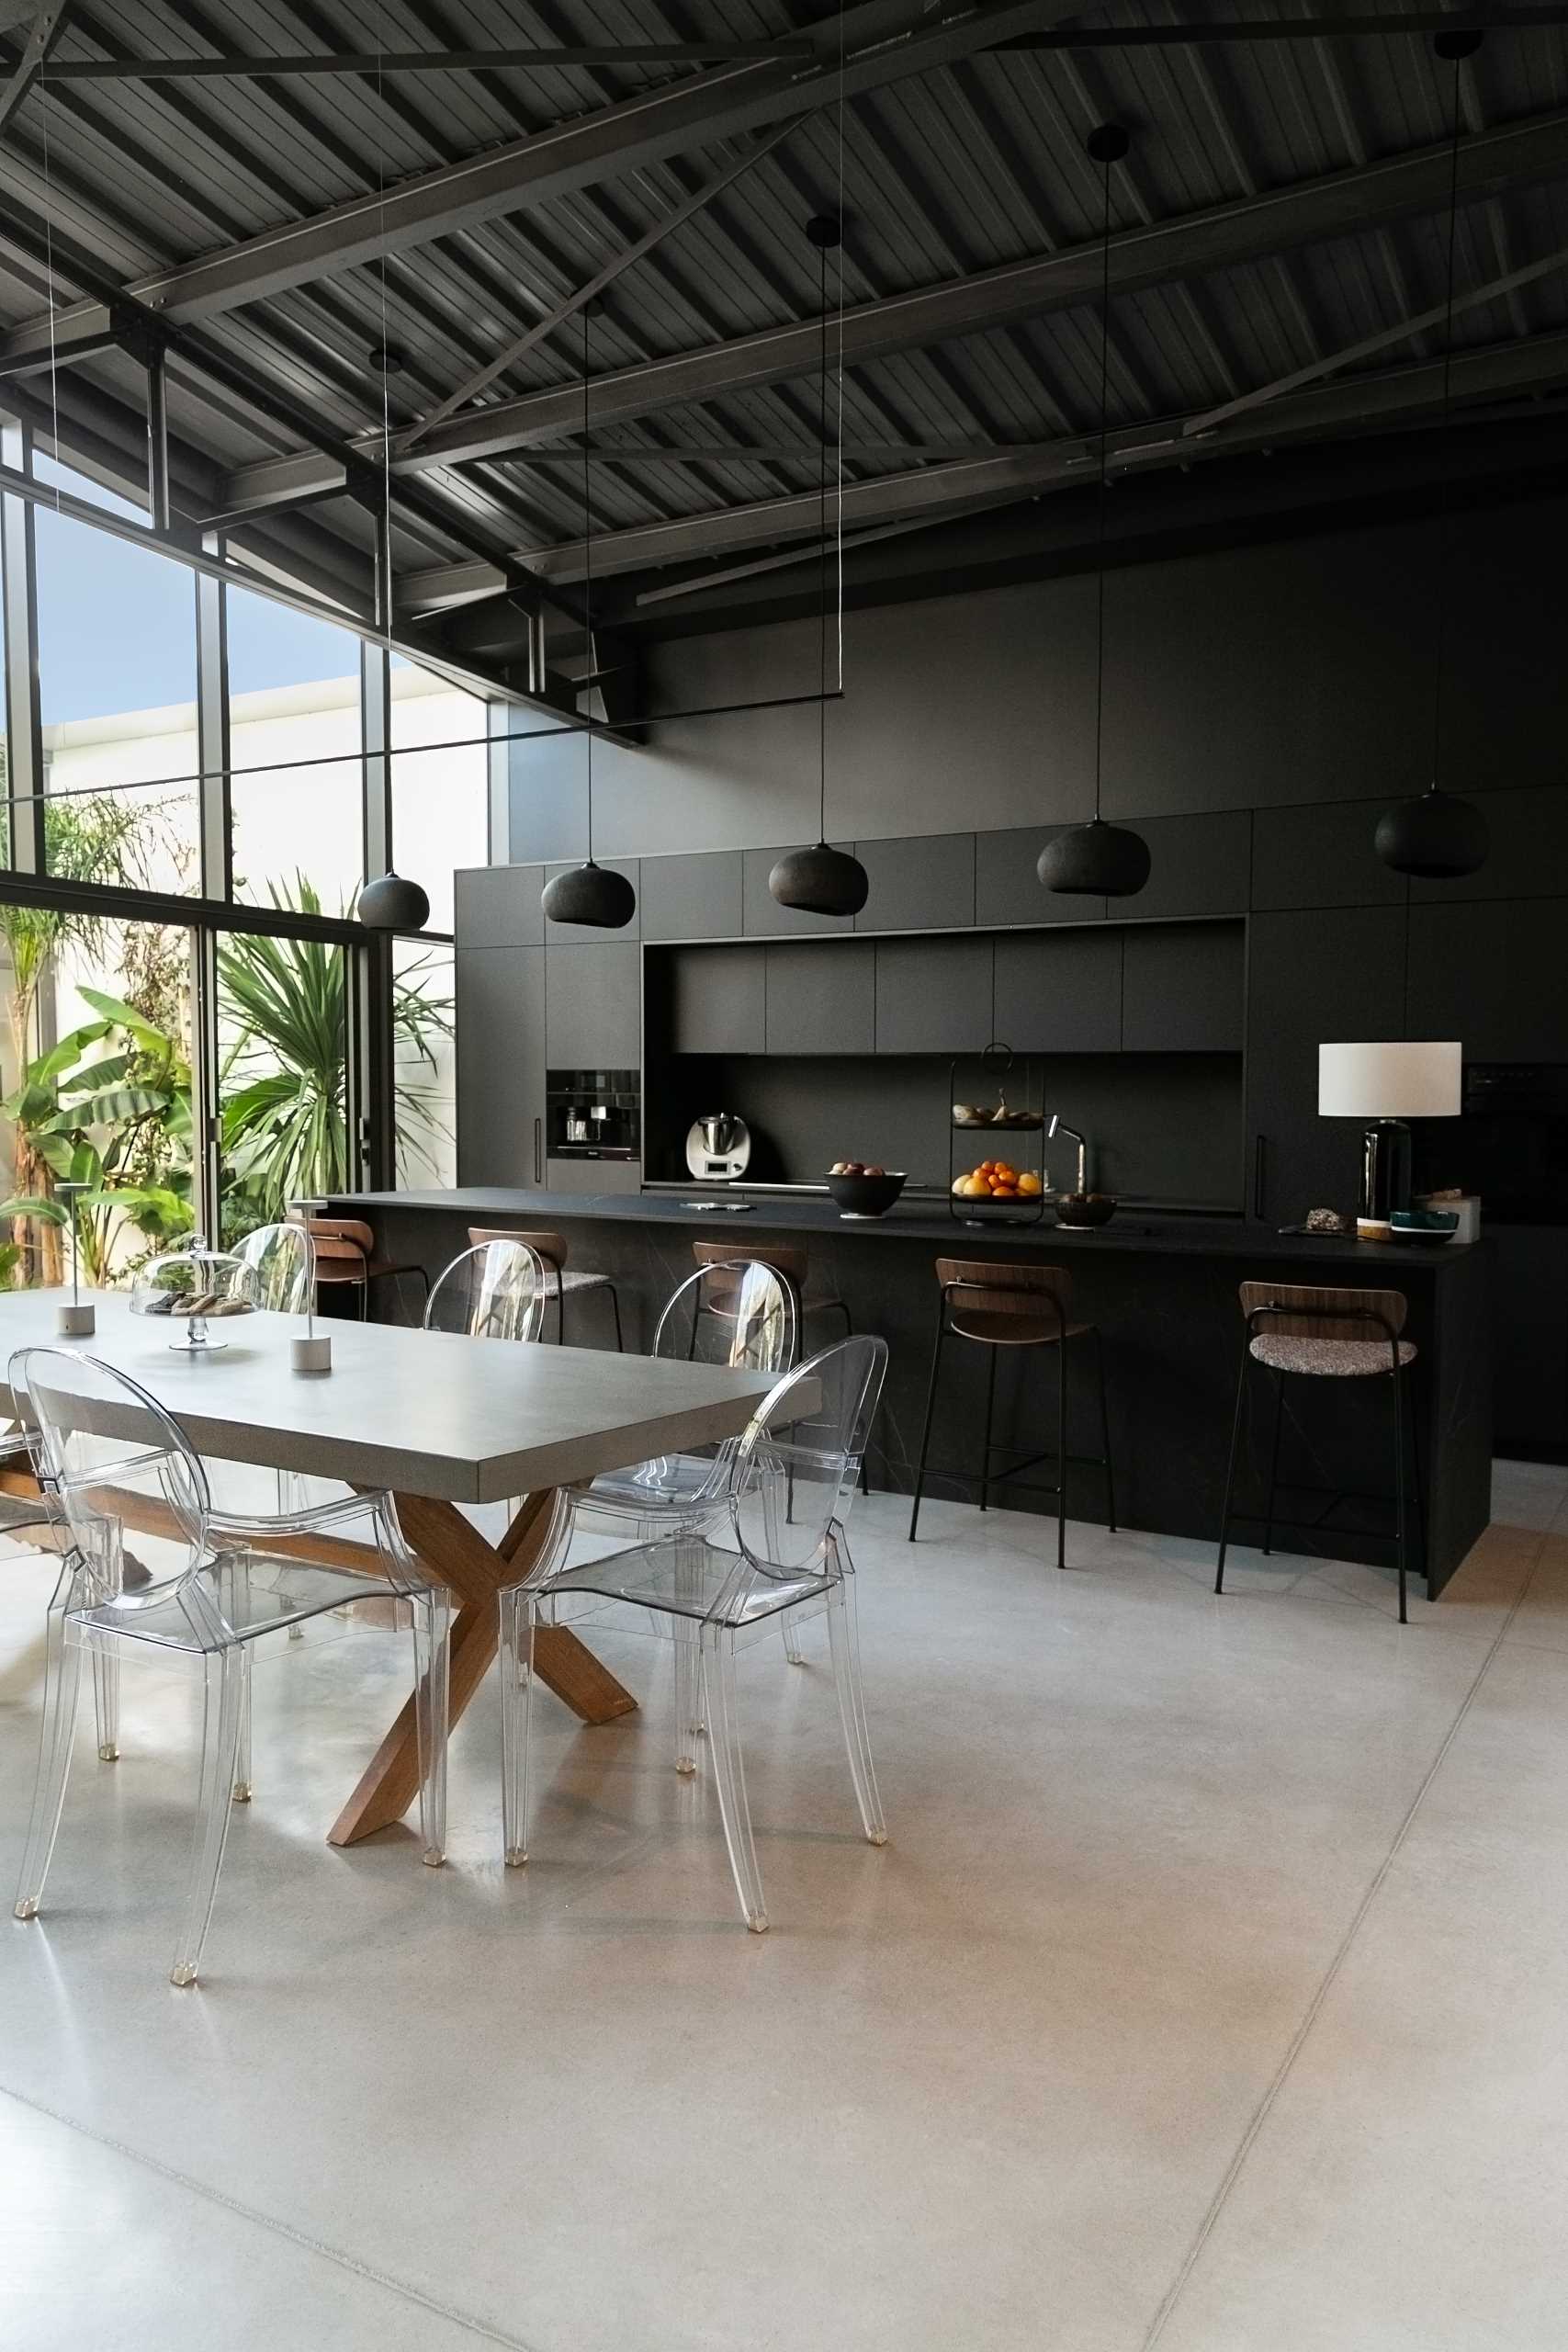 A warehouse conversion with a minimalist black kitchen and open plan dining area.